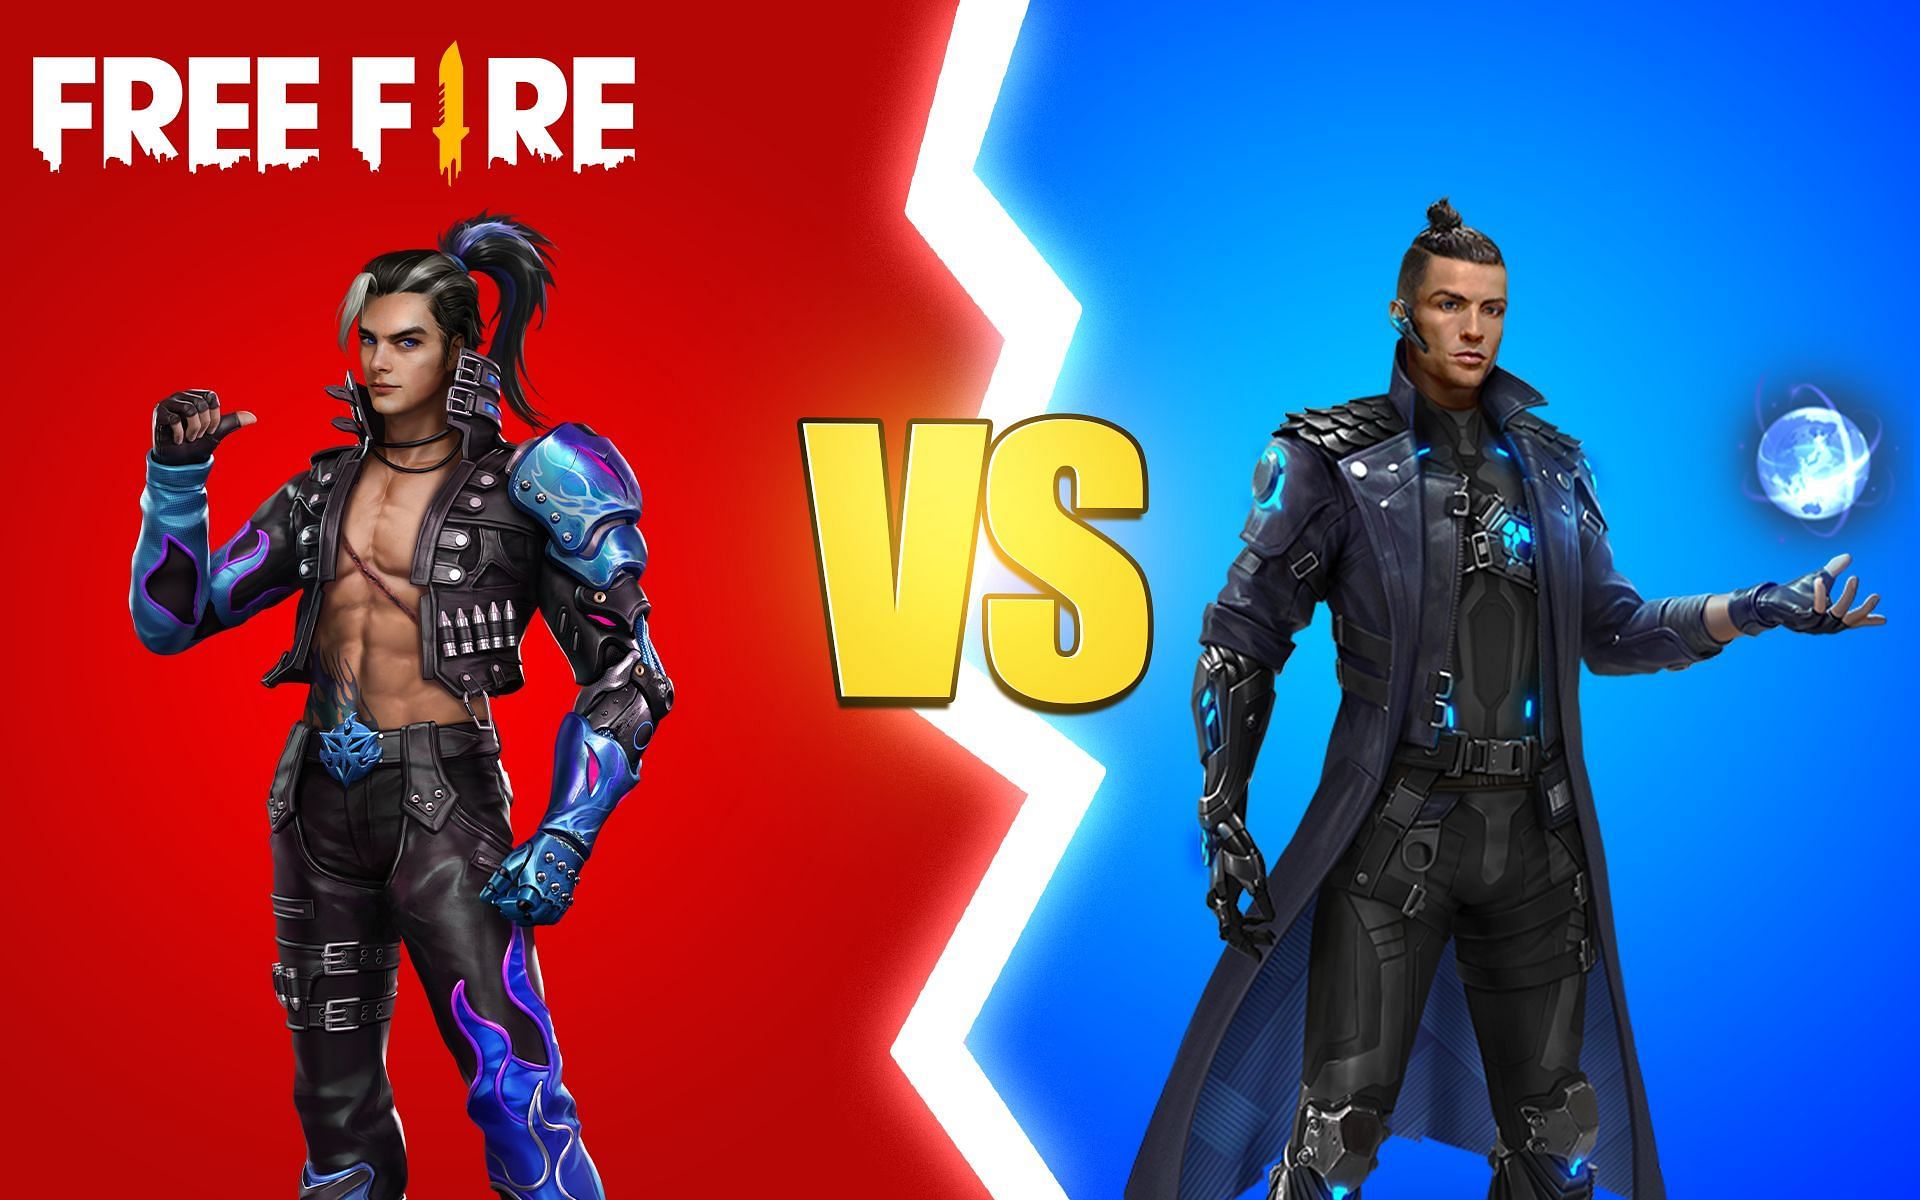 Only one of these characters is best for Clash Squad mode in Free Fire (Image via Sportskeeda)